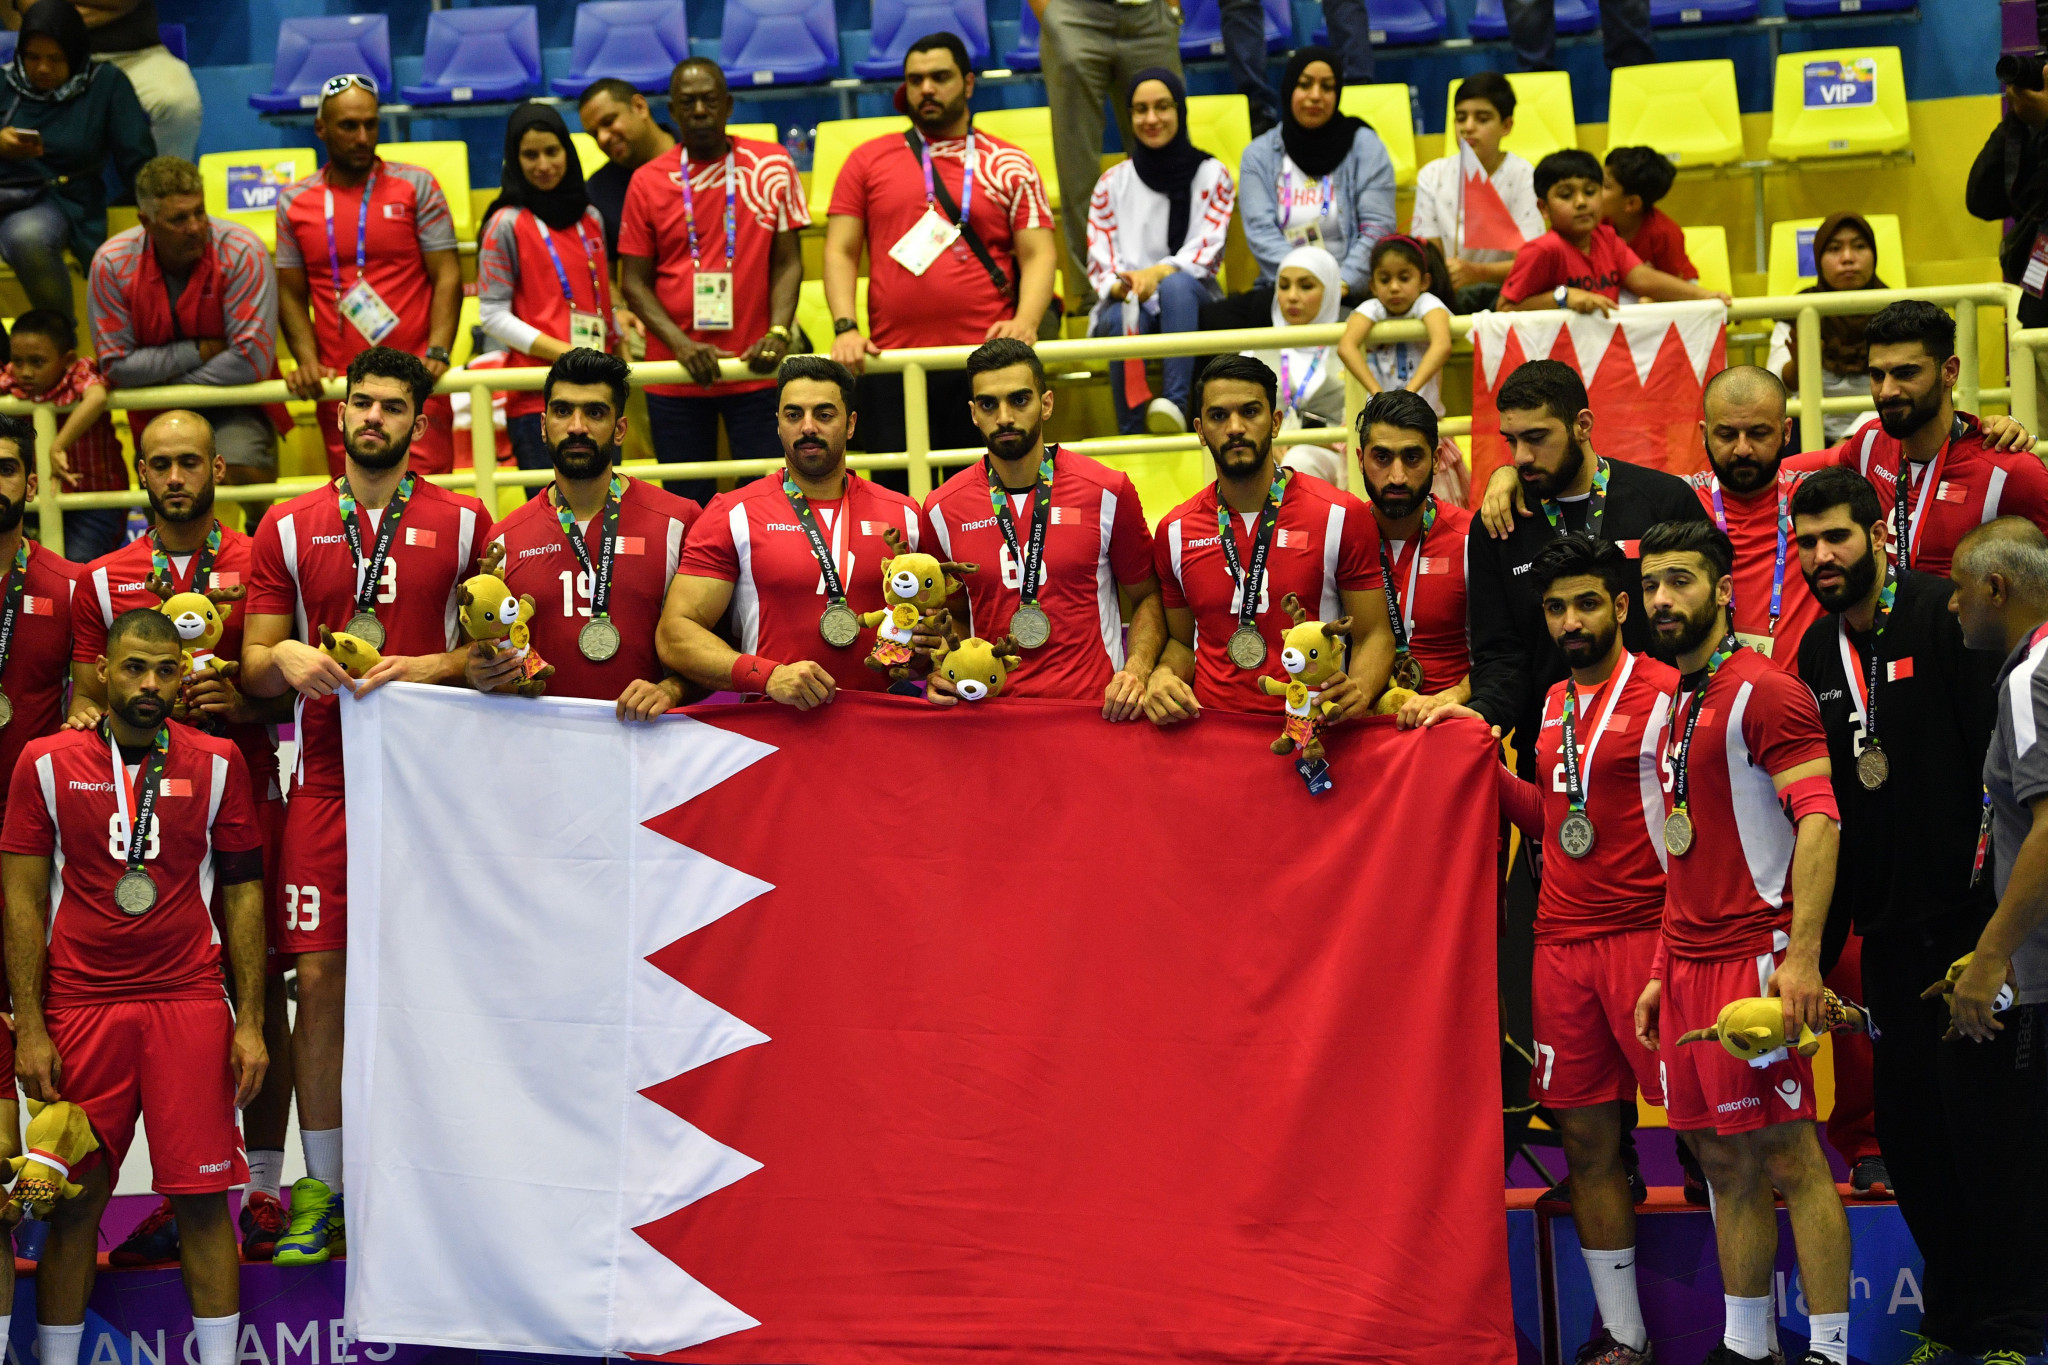 Bahrain enjoyed its best Asian Games performance to date at Jakarta-Palembang 2018 ©Getty Images